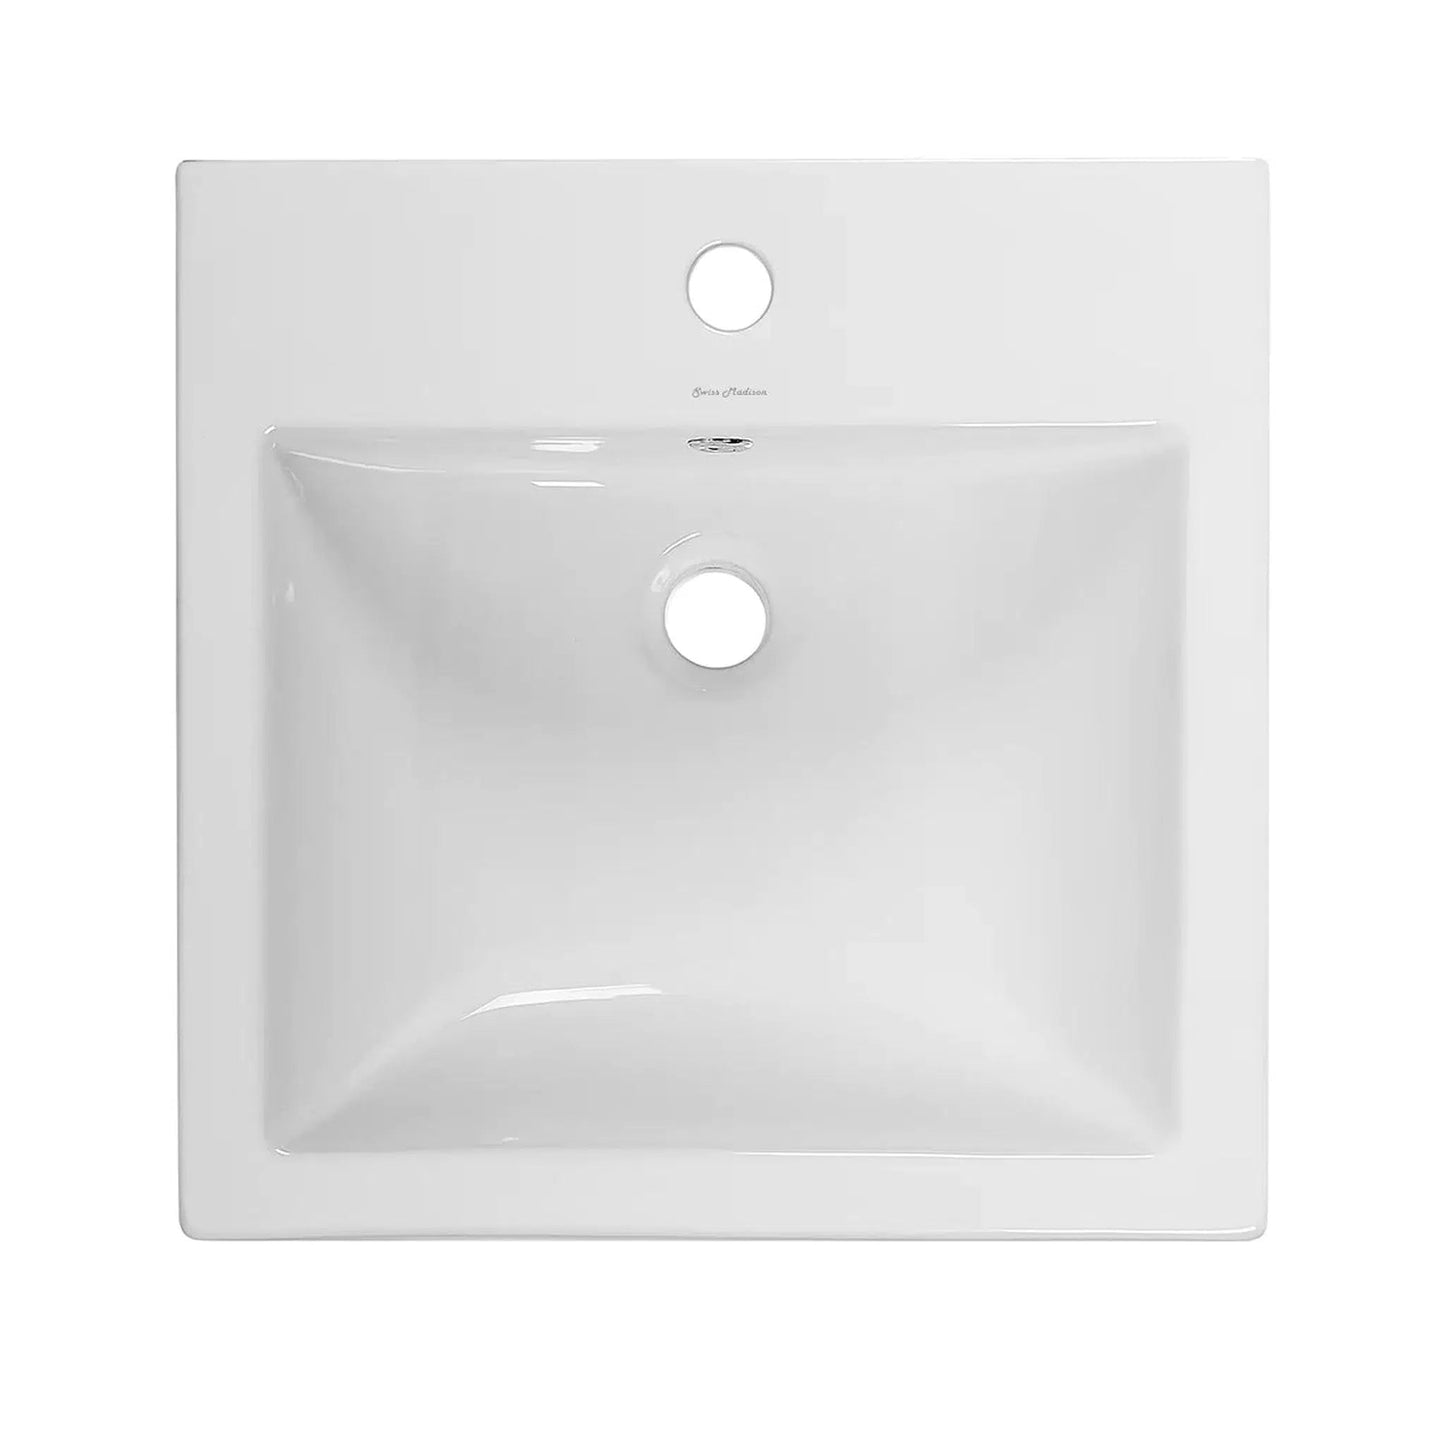 Swiss Madison Voltaire 18" x 18" Wall-Mounted Square White Ceramic Bathroom Sink